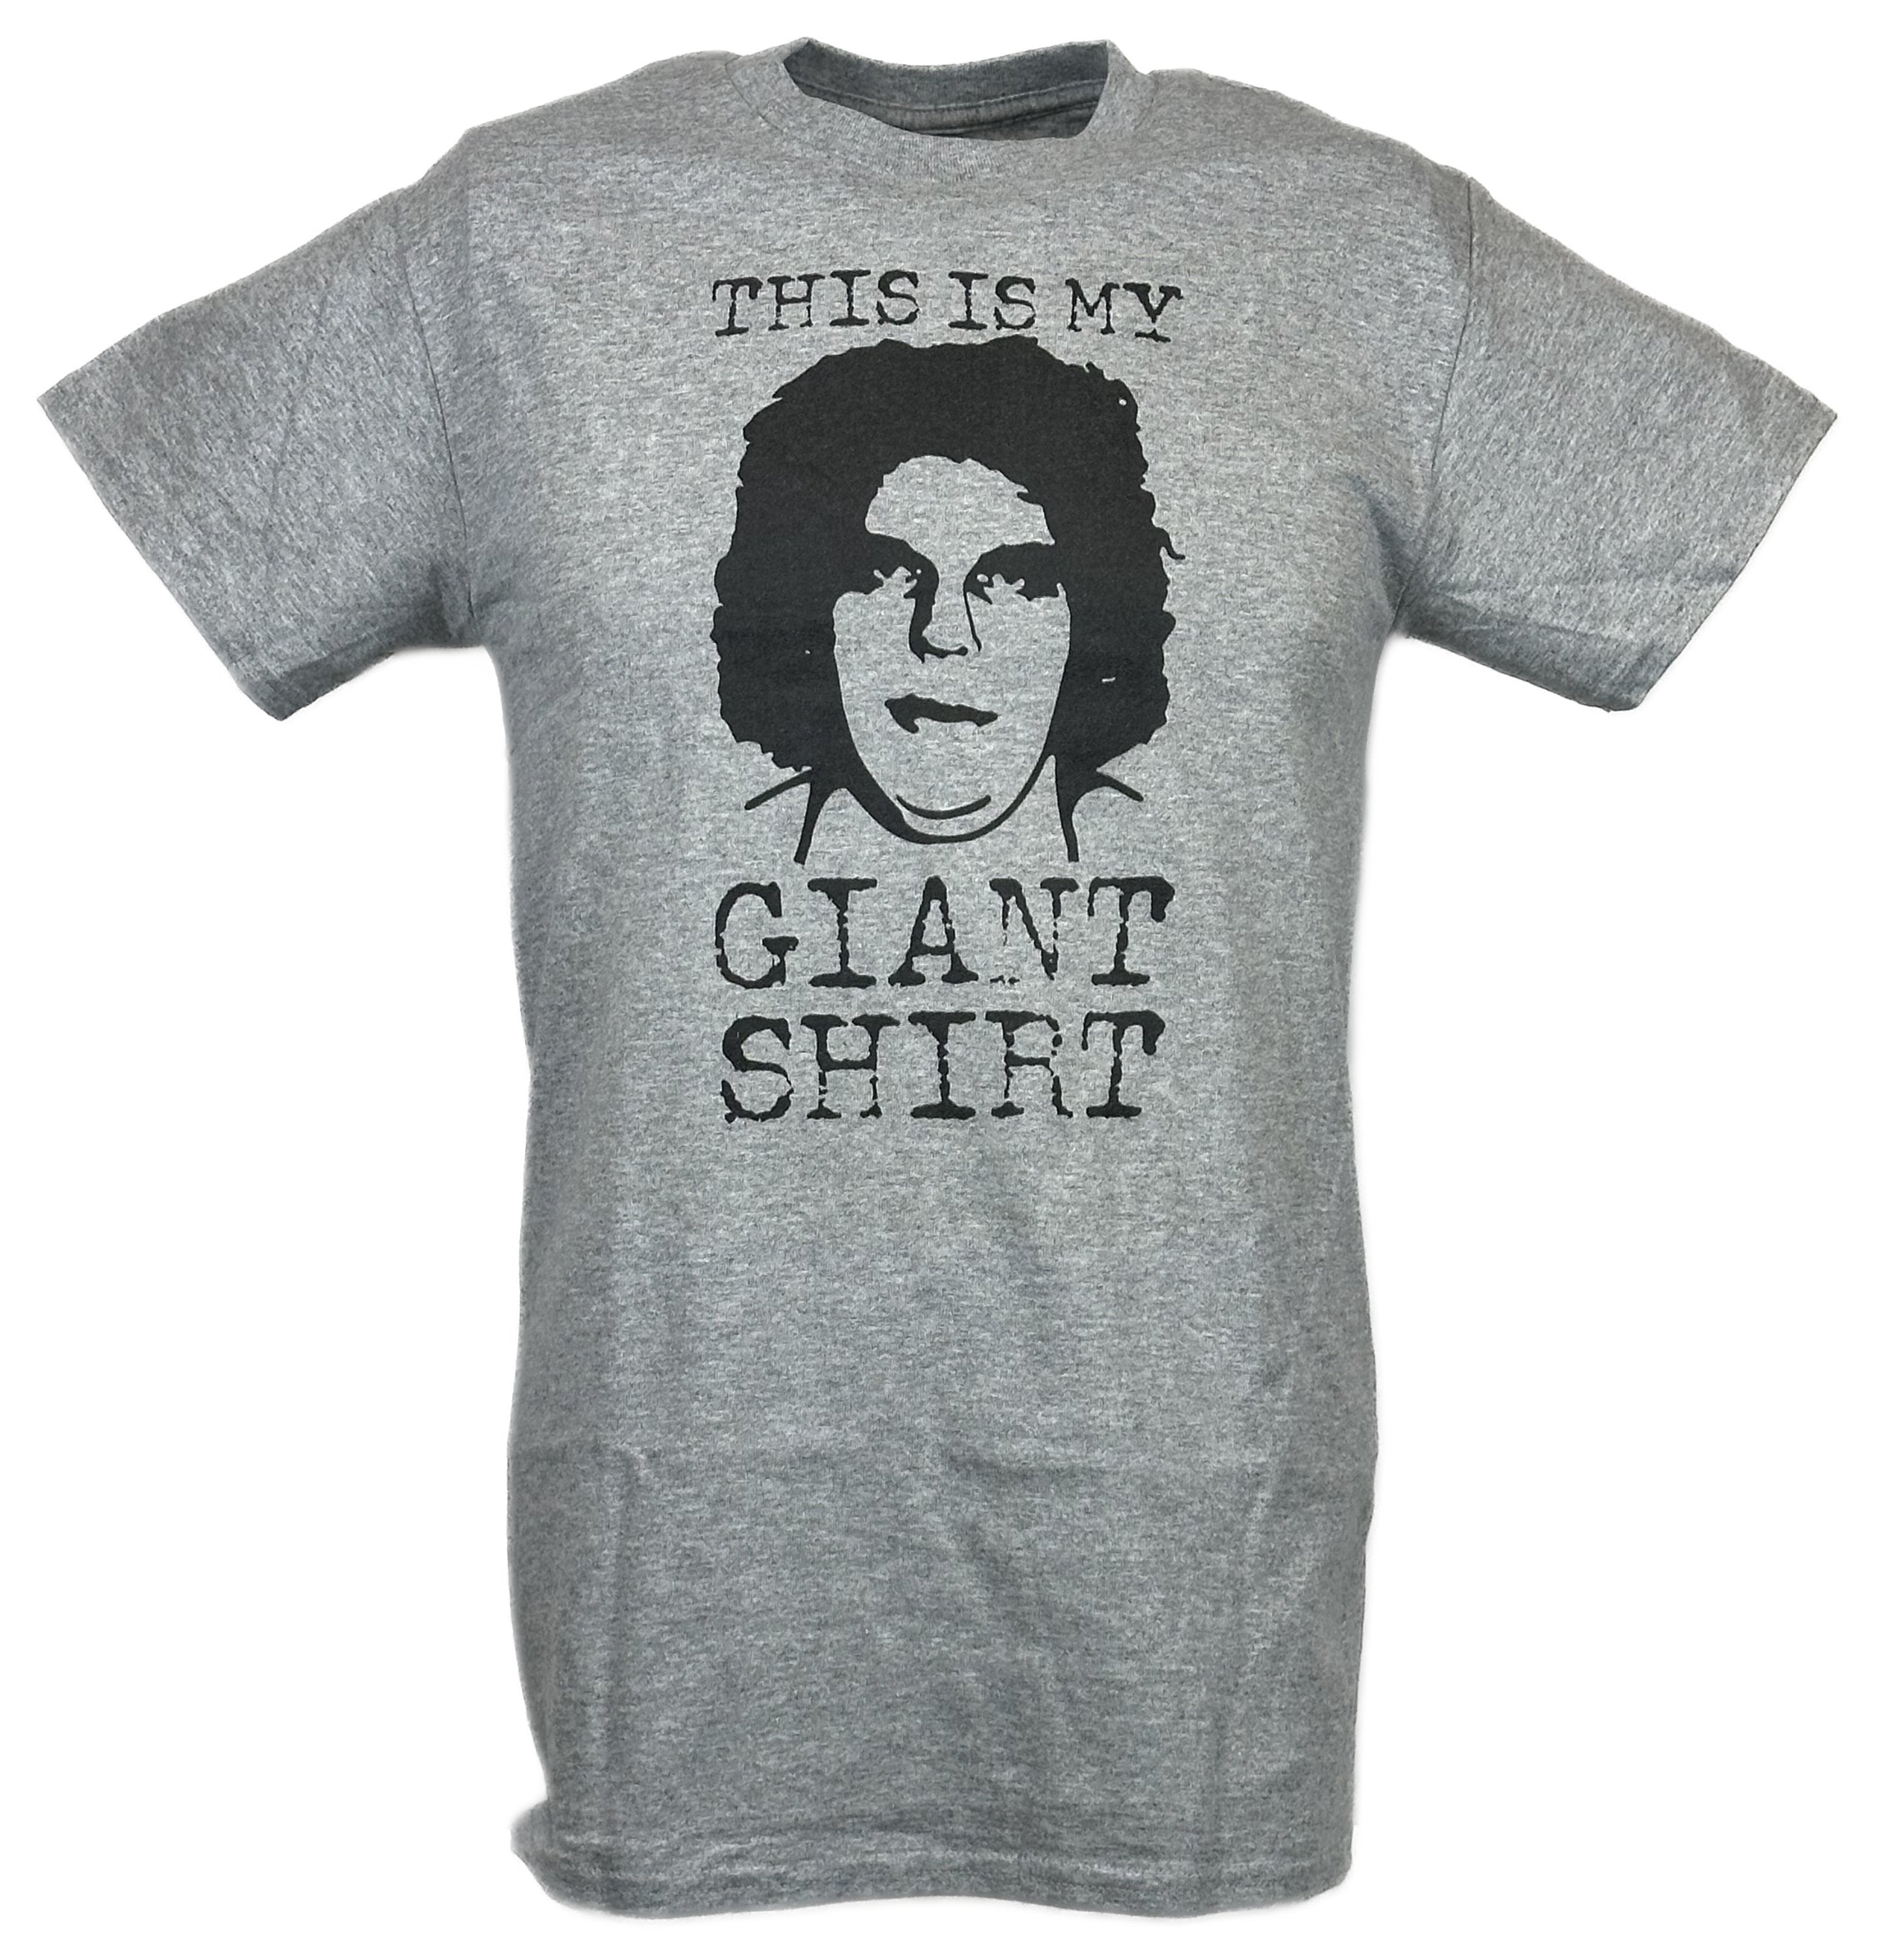 this is my andre the giant t shirt gray 9784